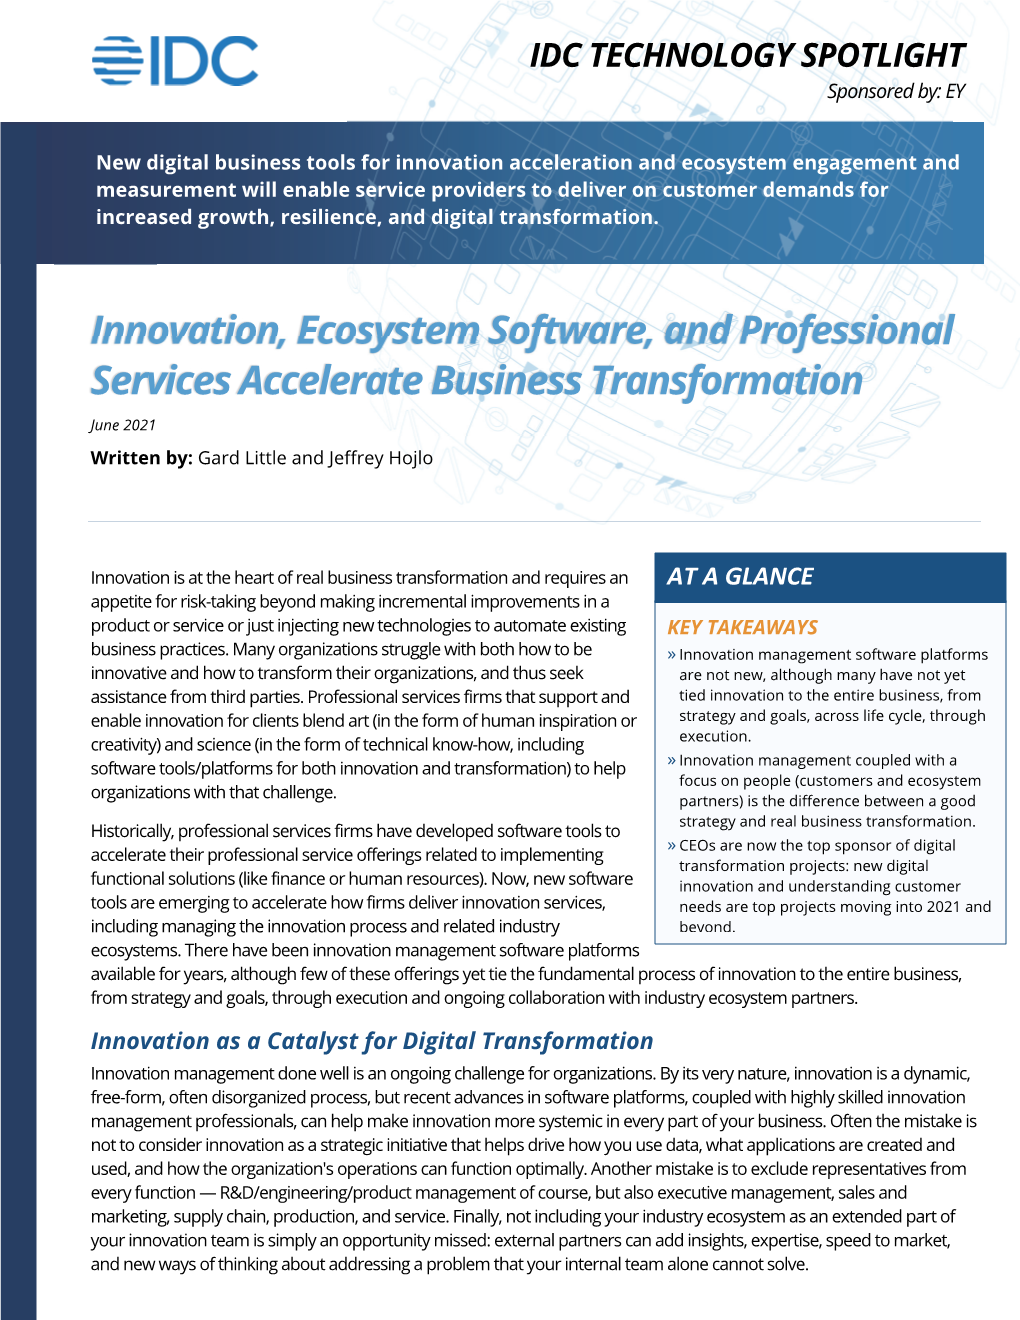 Innovation, Ecosystem Software, and Professional Services Accelerate Business Transformation June 2021 Written By: Gard Little and Jeffrey Hojlo